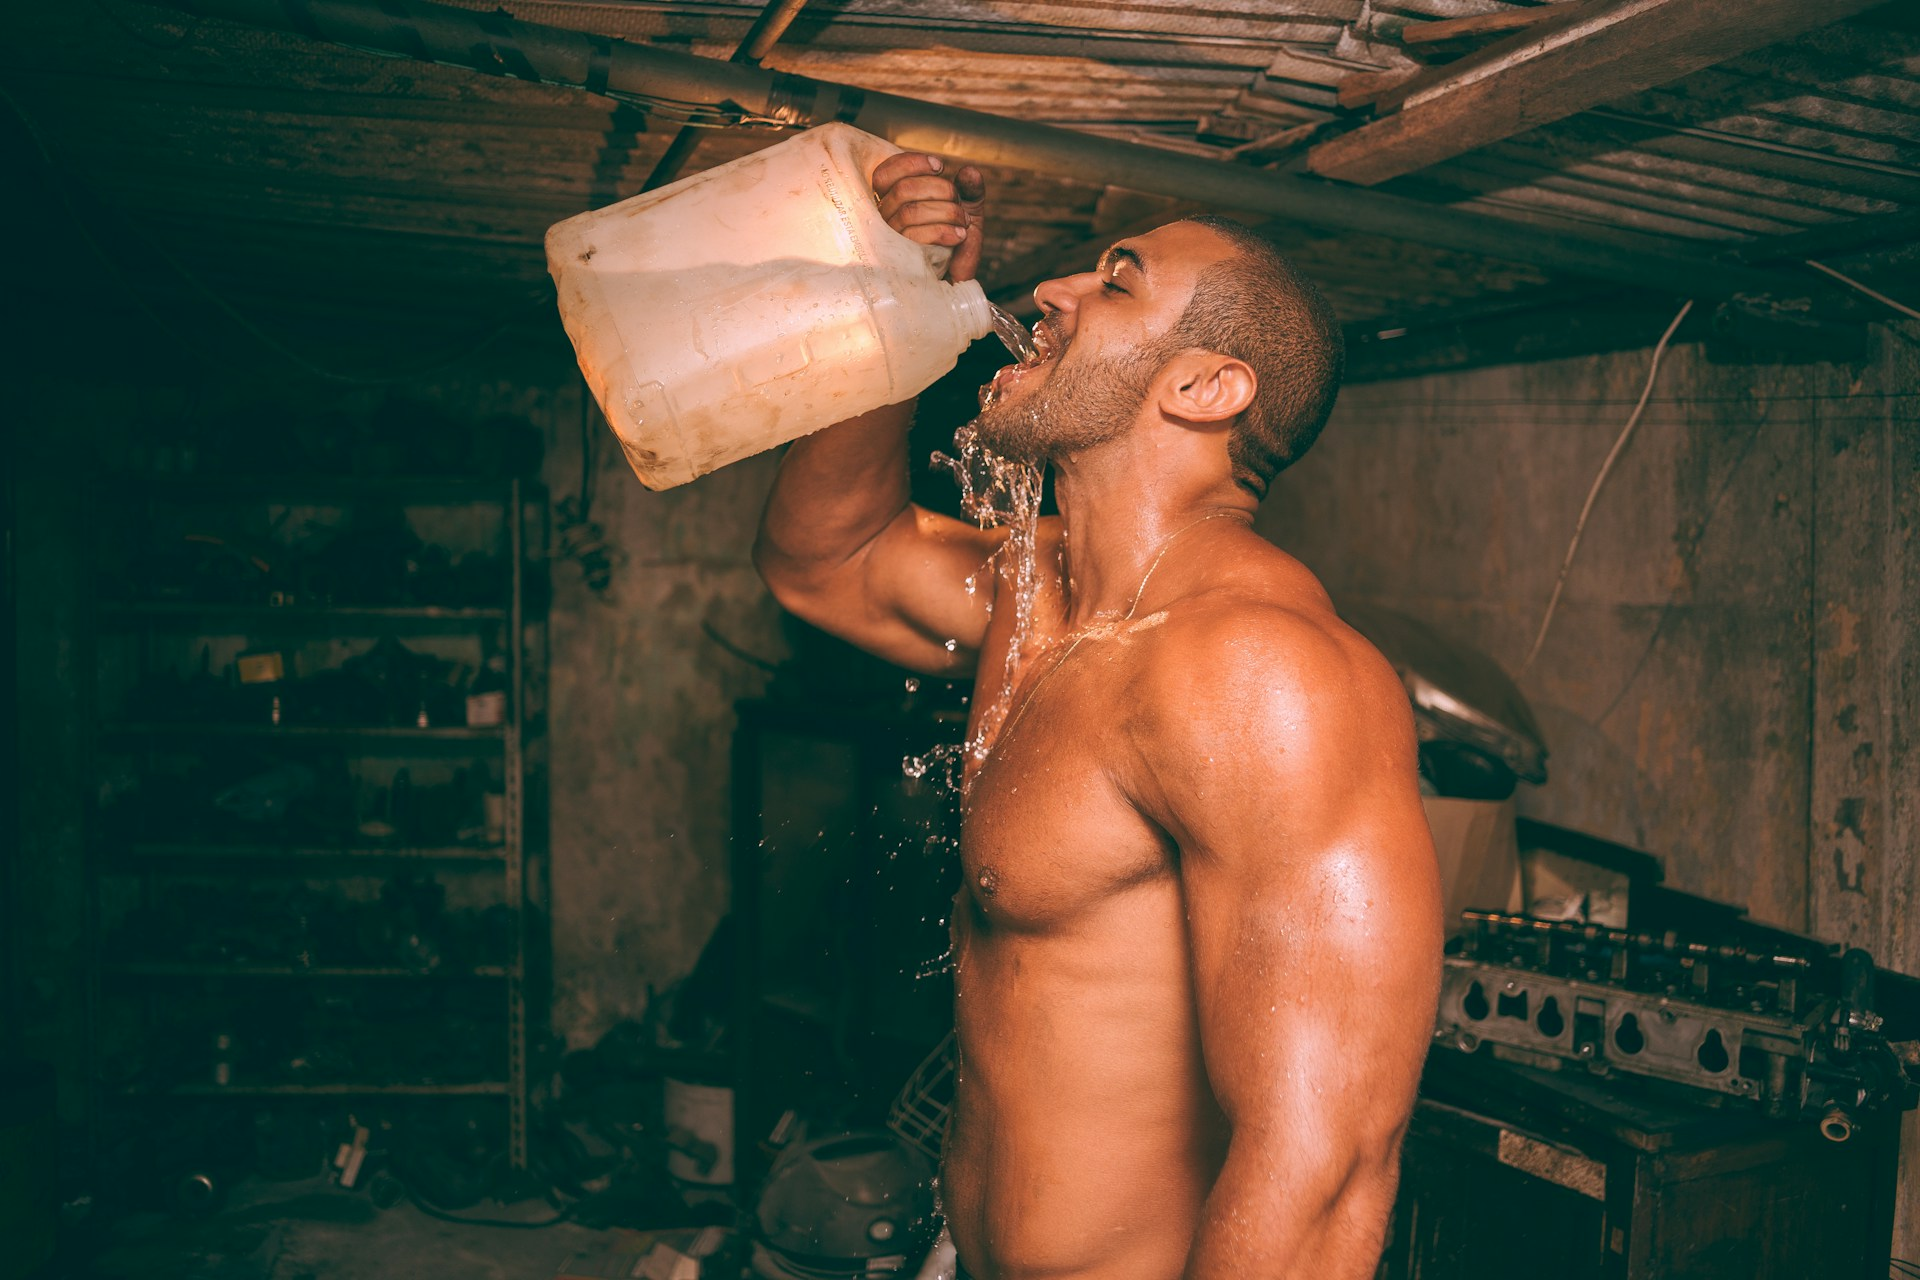 Ripped dudes know how important it is to drink water and stay hydrated, especially for maintaining a healthy sperm count